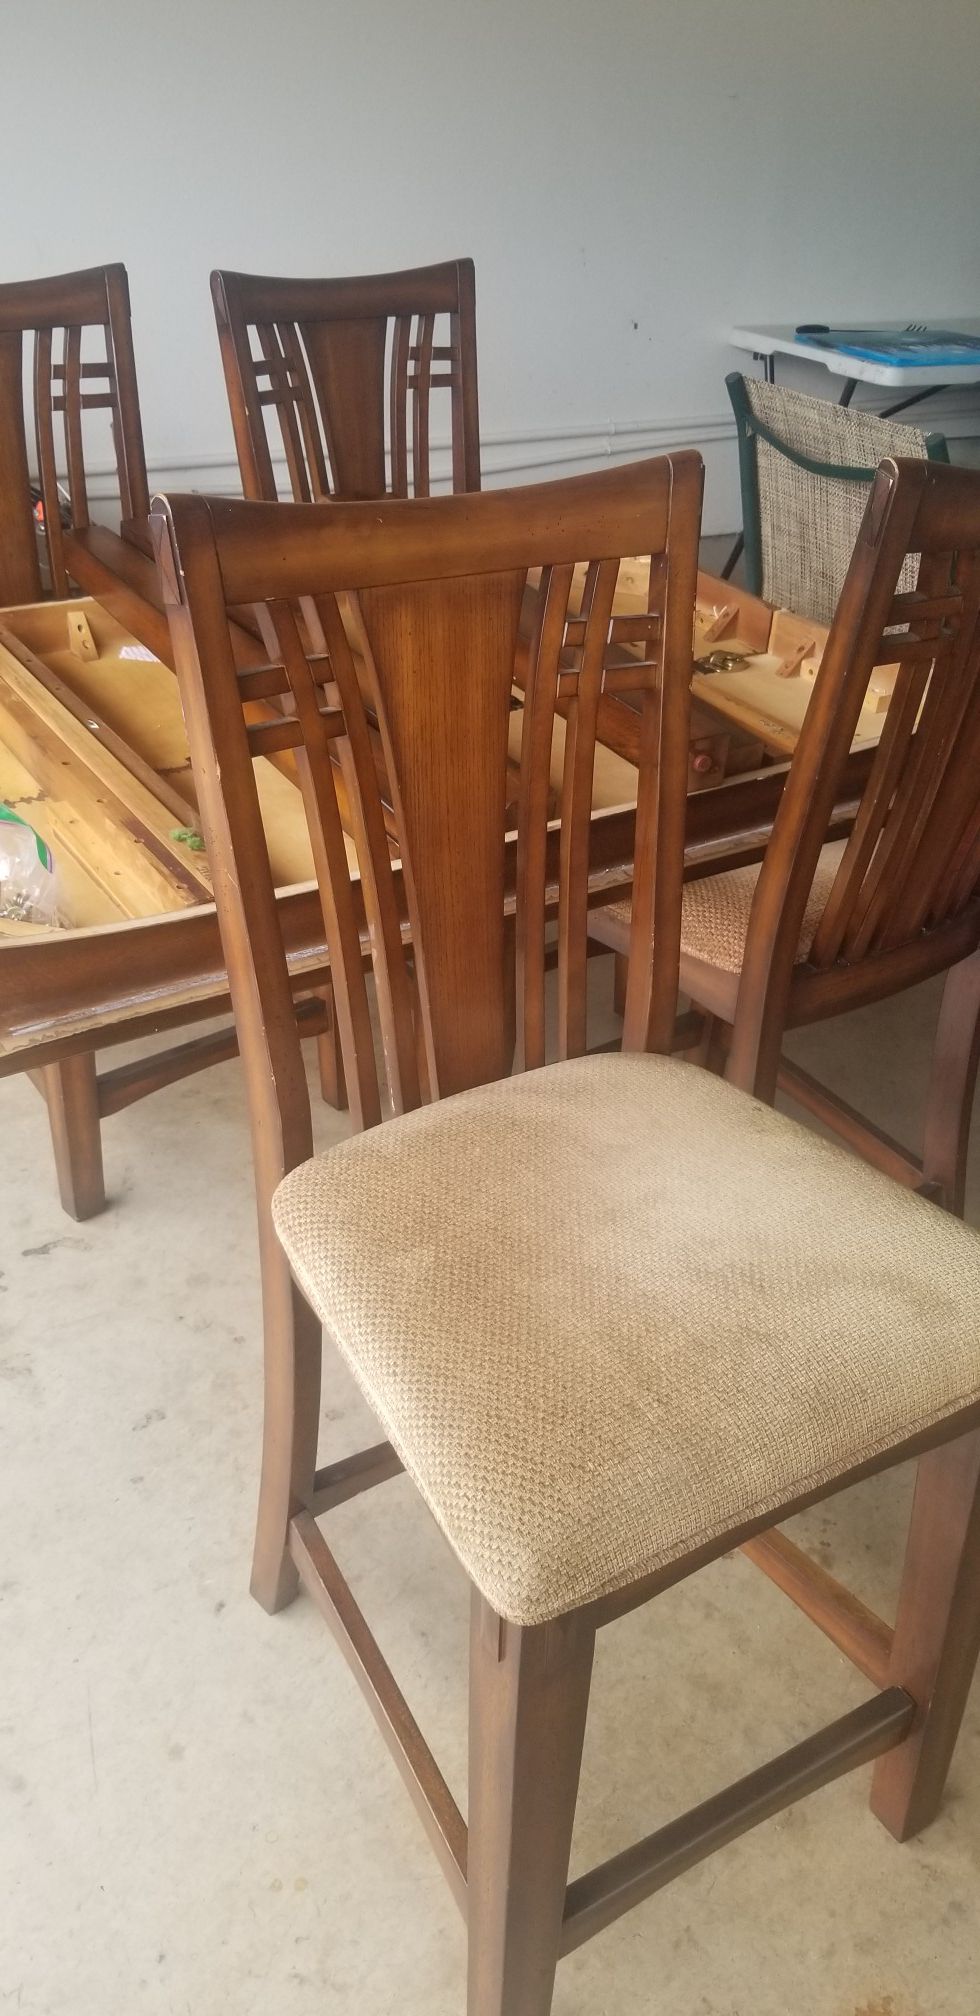 4 chairs dining table